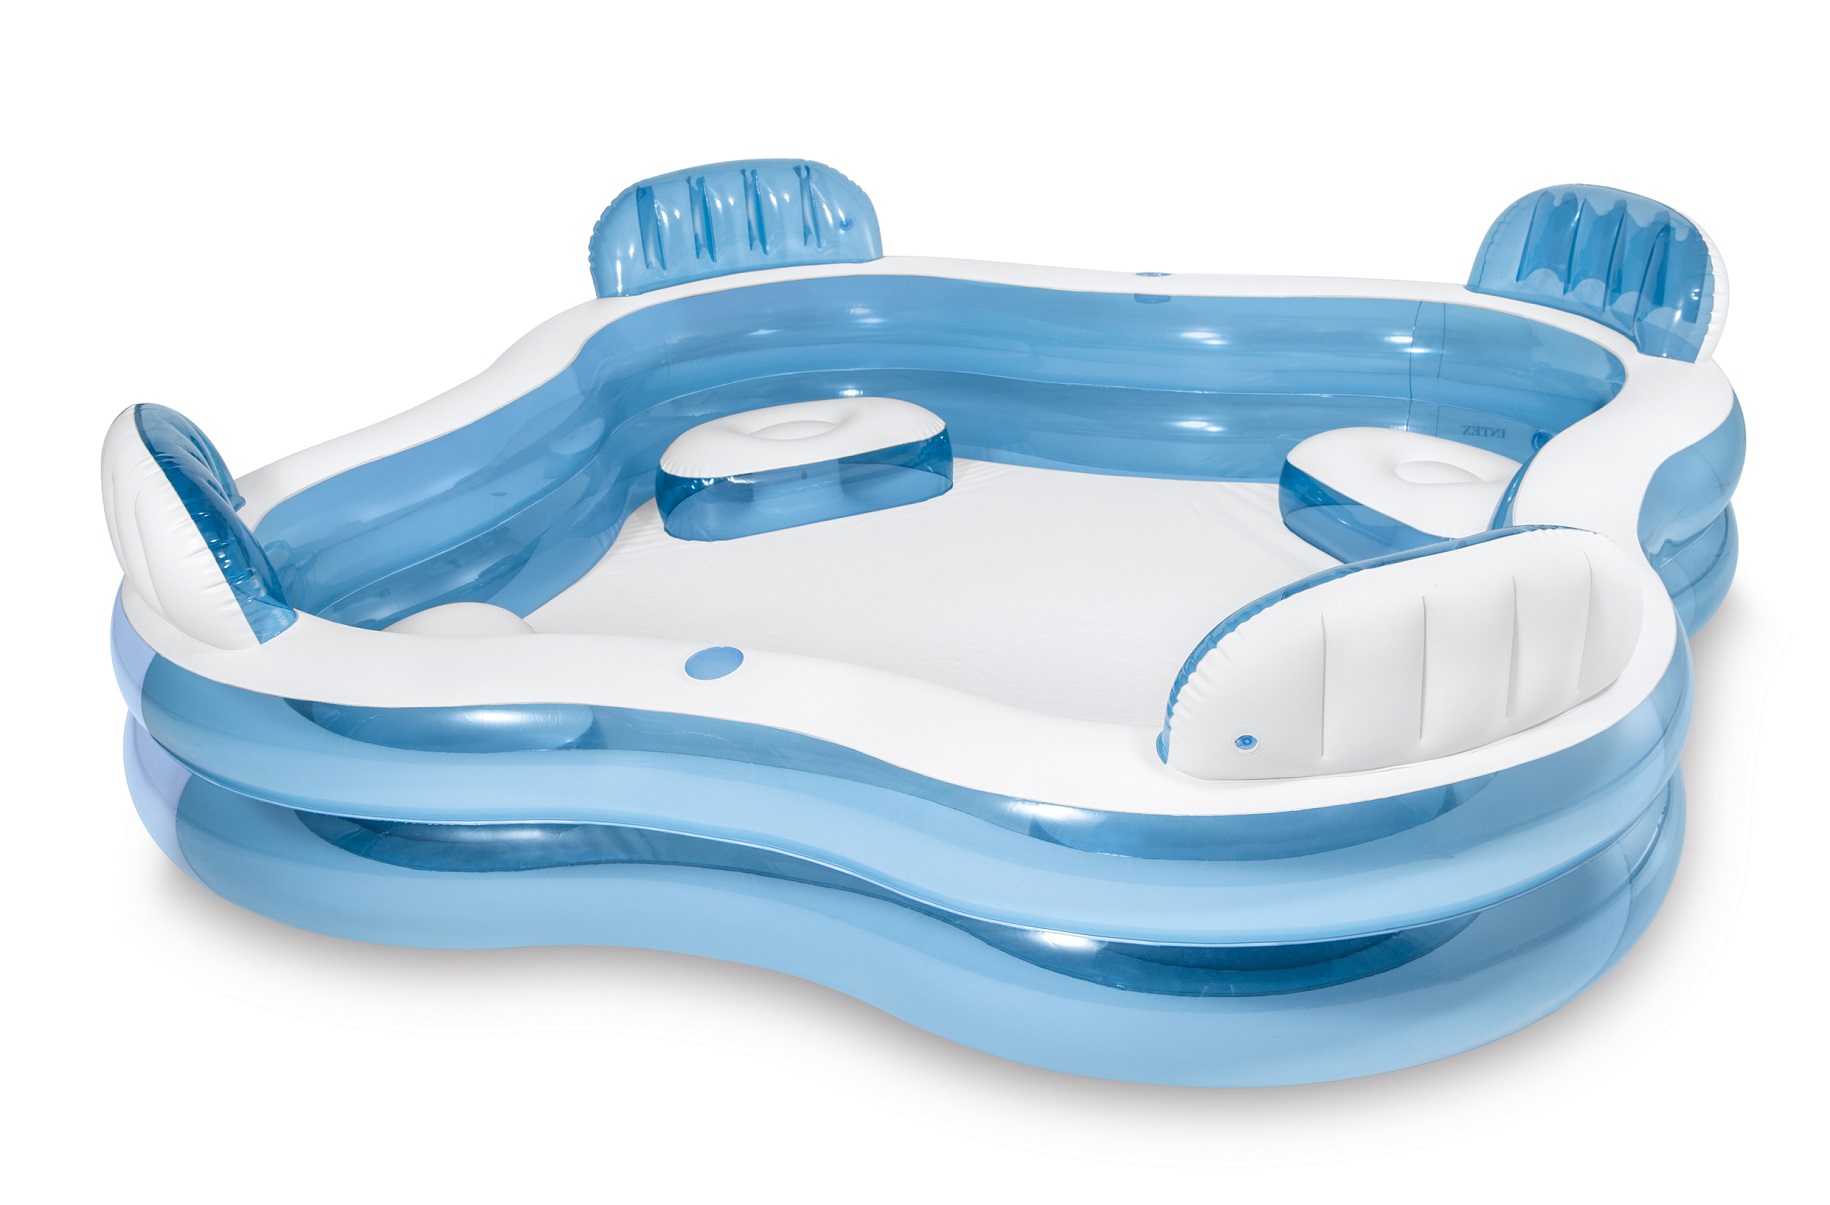 Intex Swim Center Family Lounge Inflatable Pool, 90" X 90" X 26" Ages 3+ - image 1 of 5